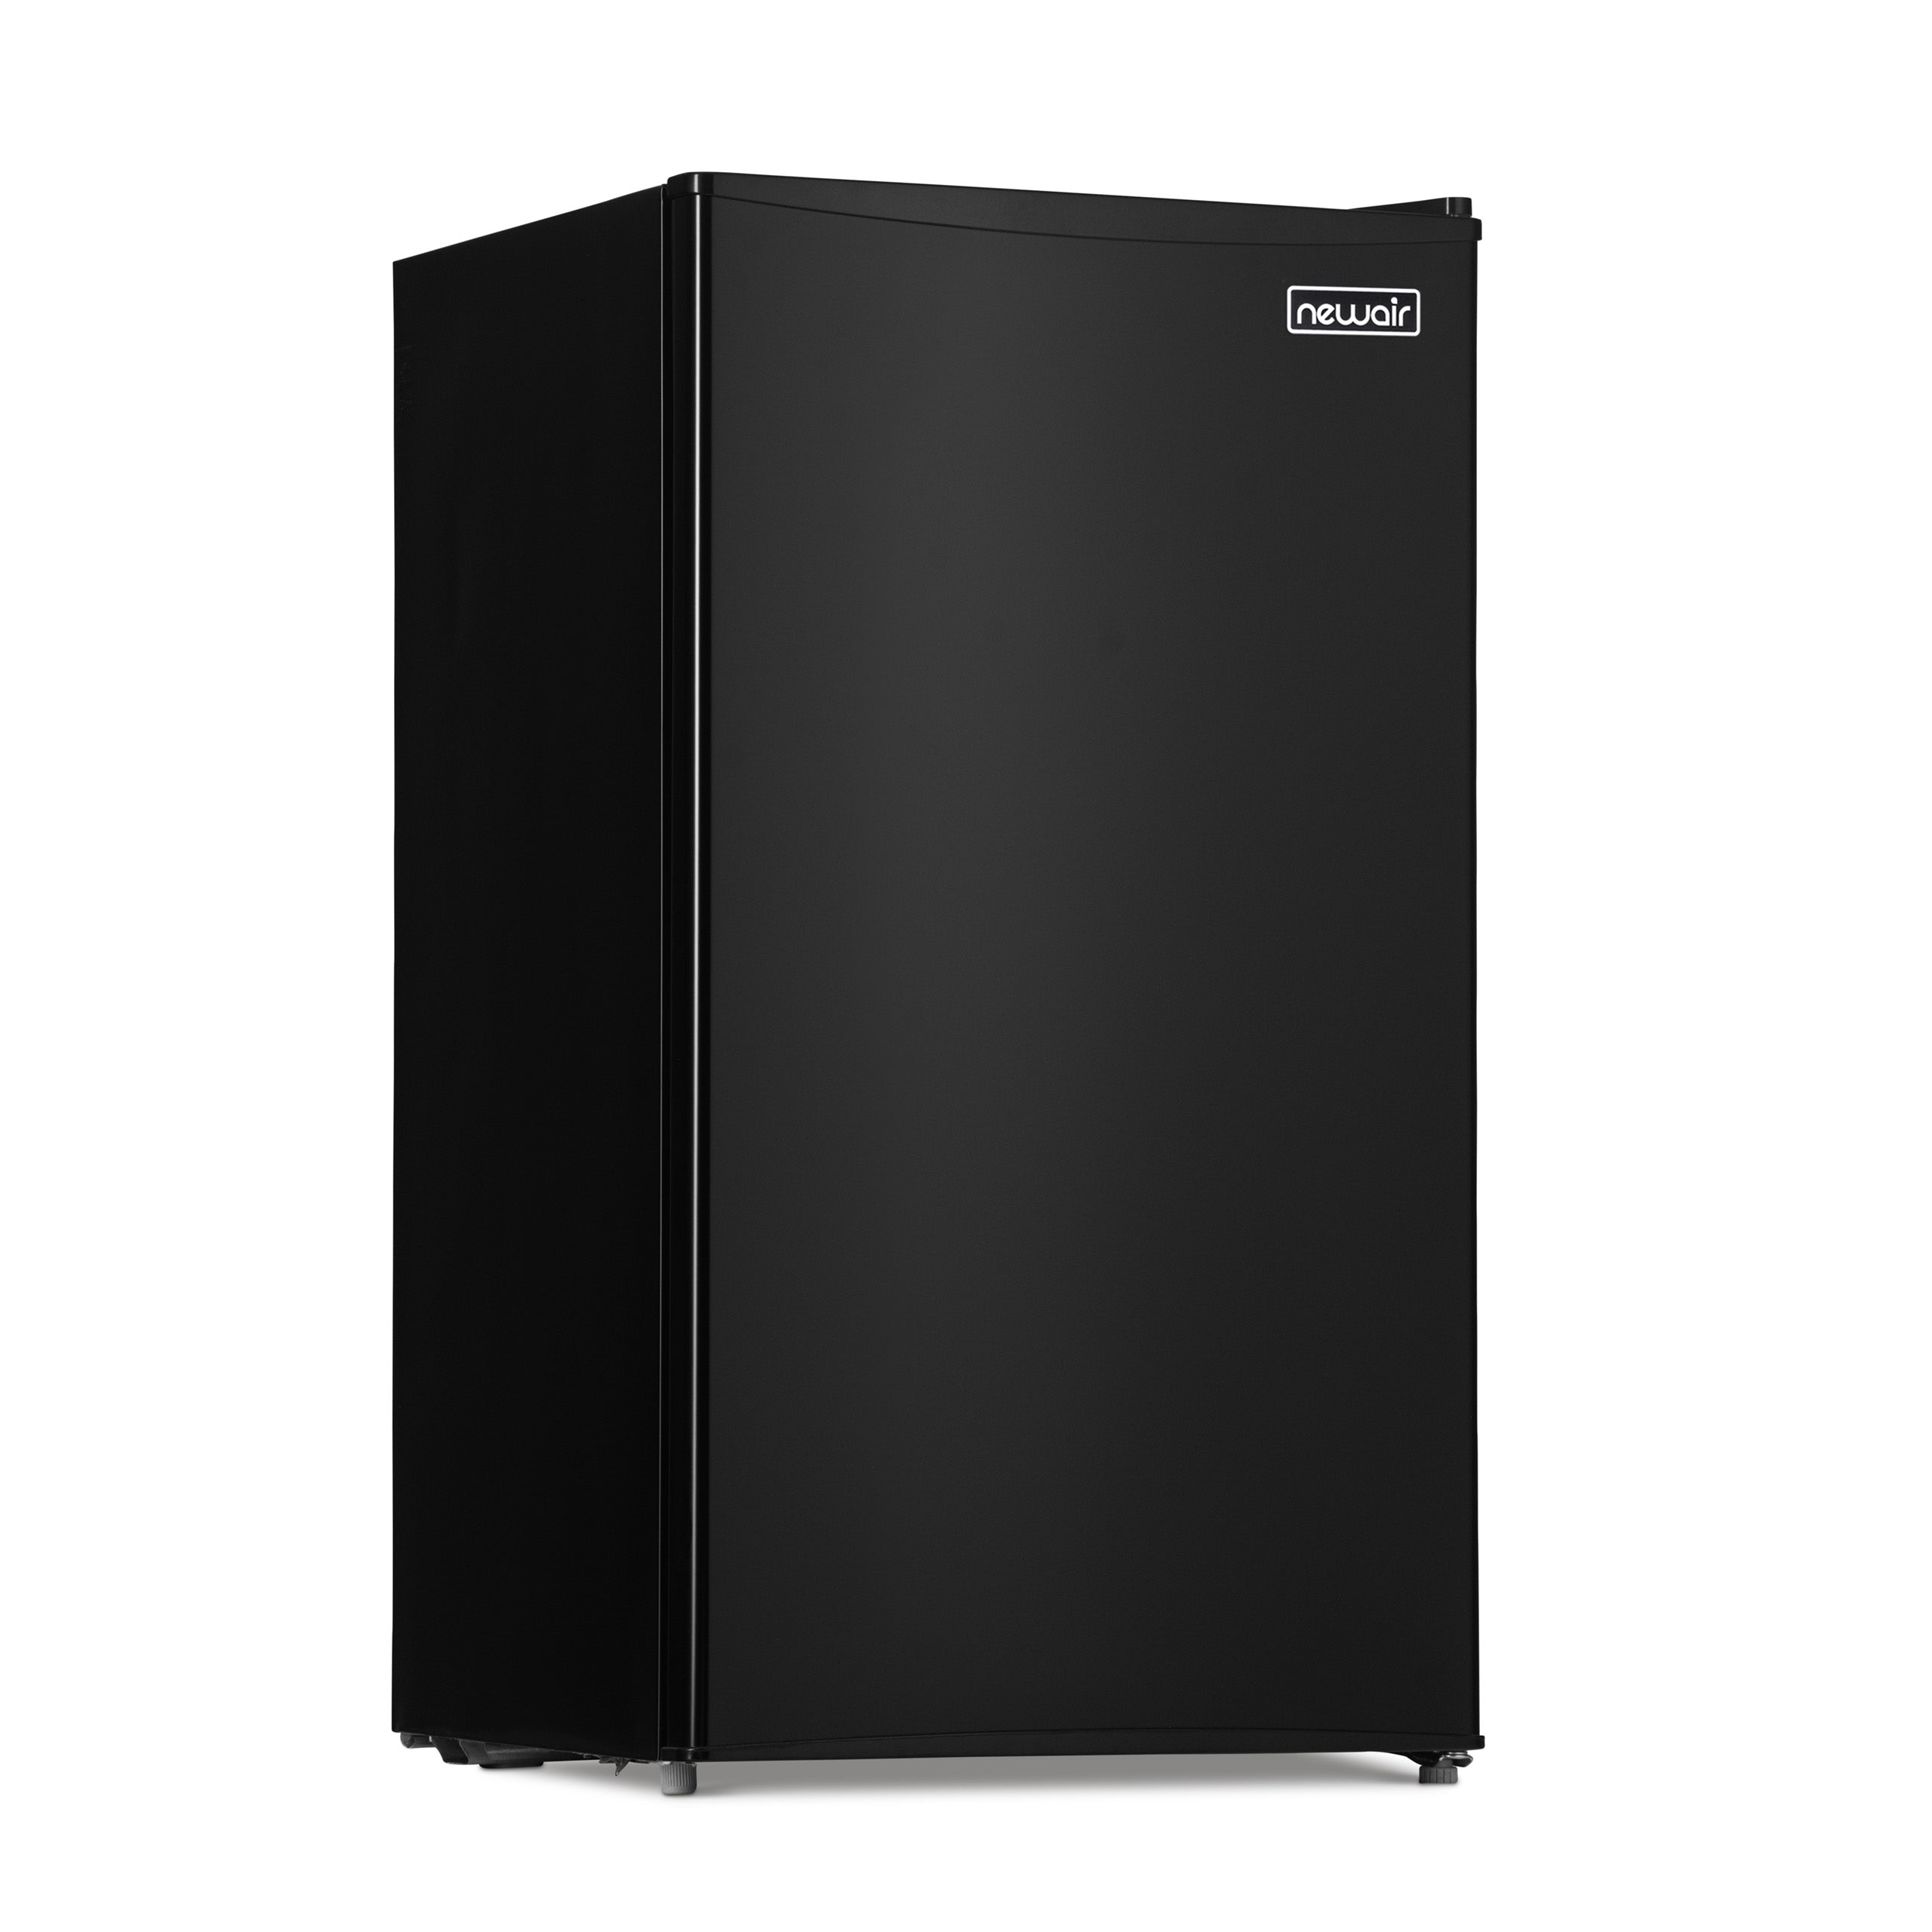 Glans Correspondent staking Newair 3.3 Cu. Ft. Compact Mini Refrigerator with Freezer – NewAir